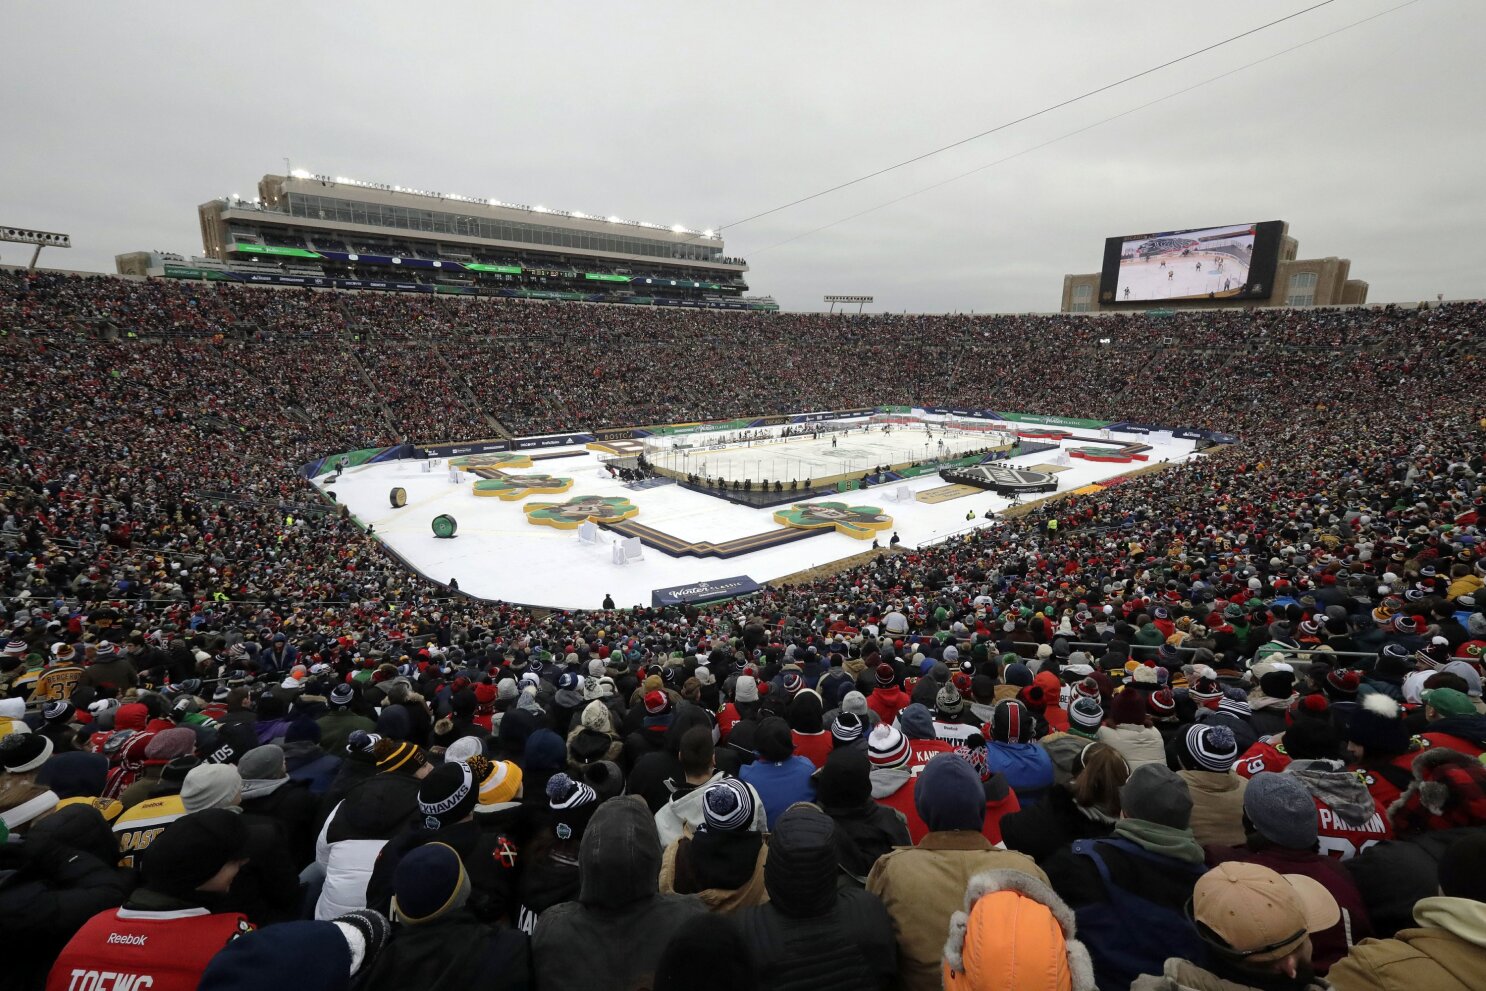 Bruins, Canadiens ready for an outdoor party at Winter Classic